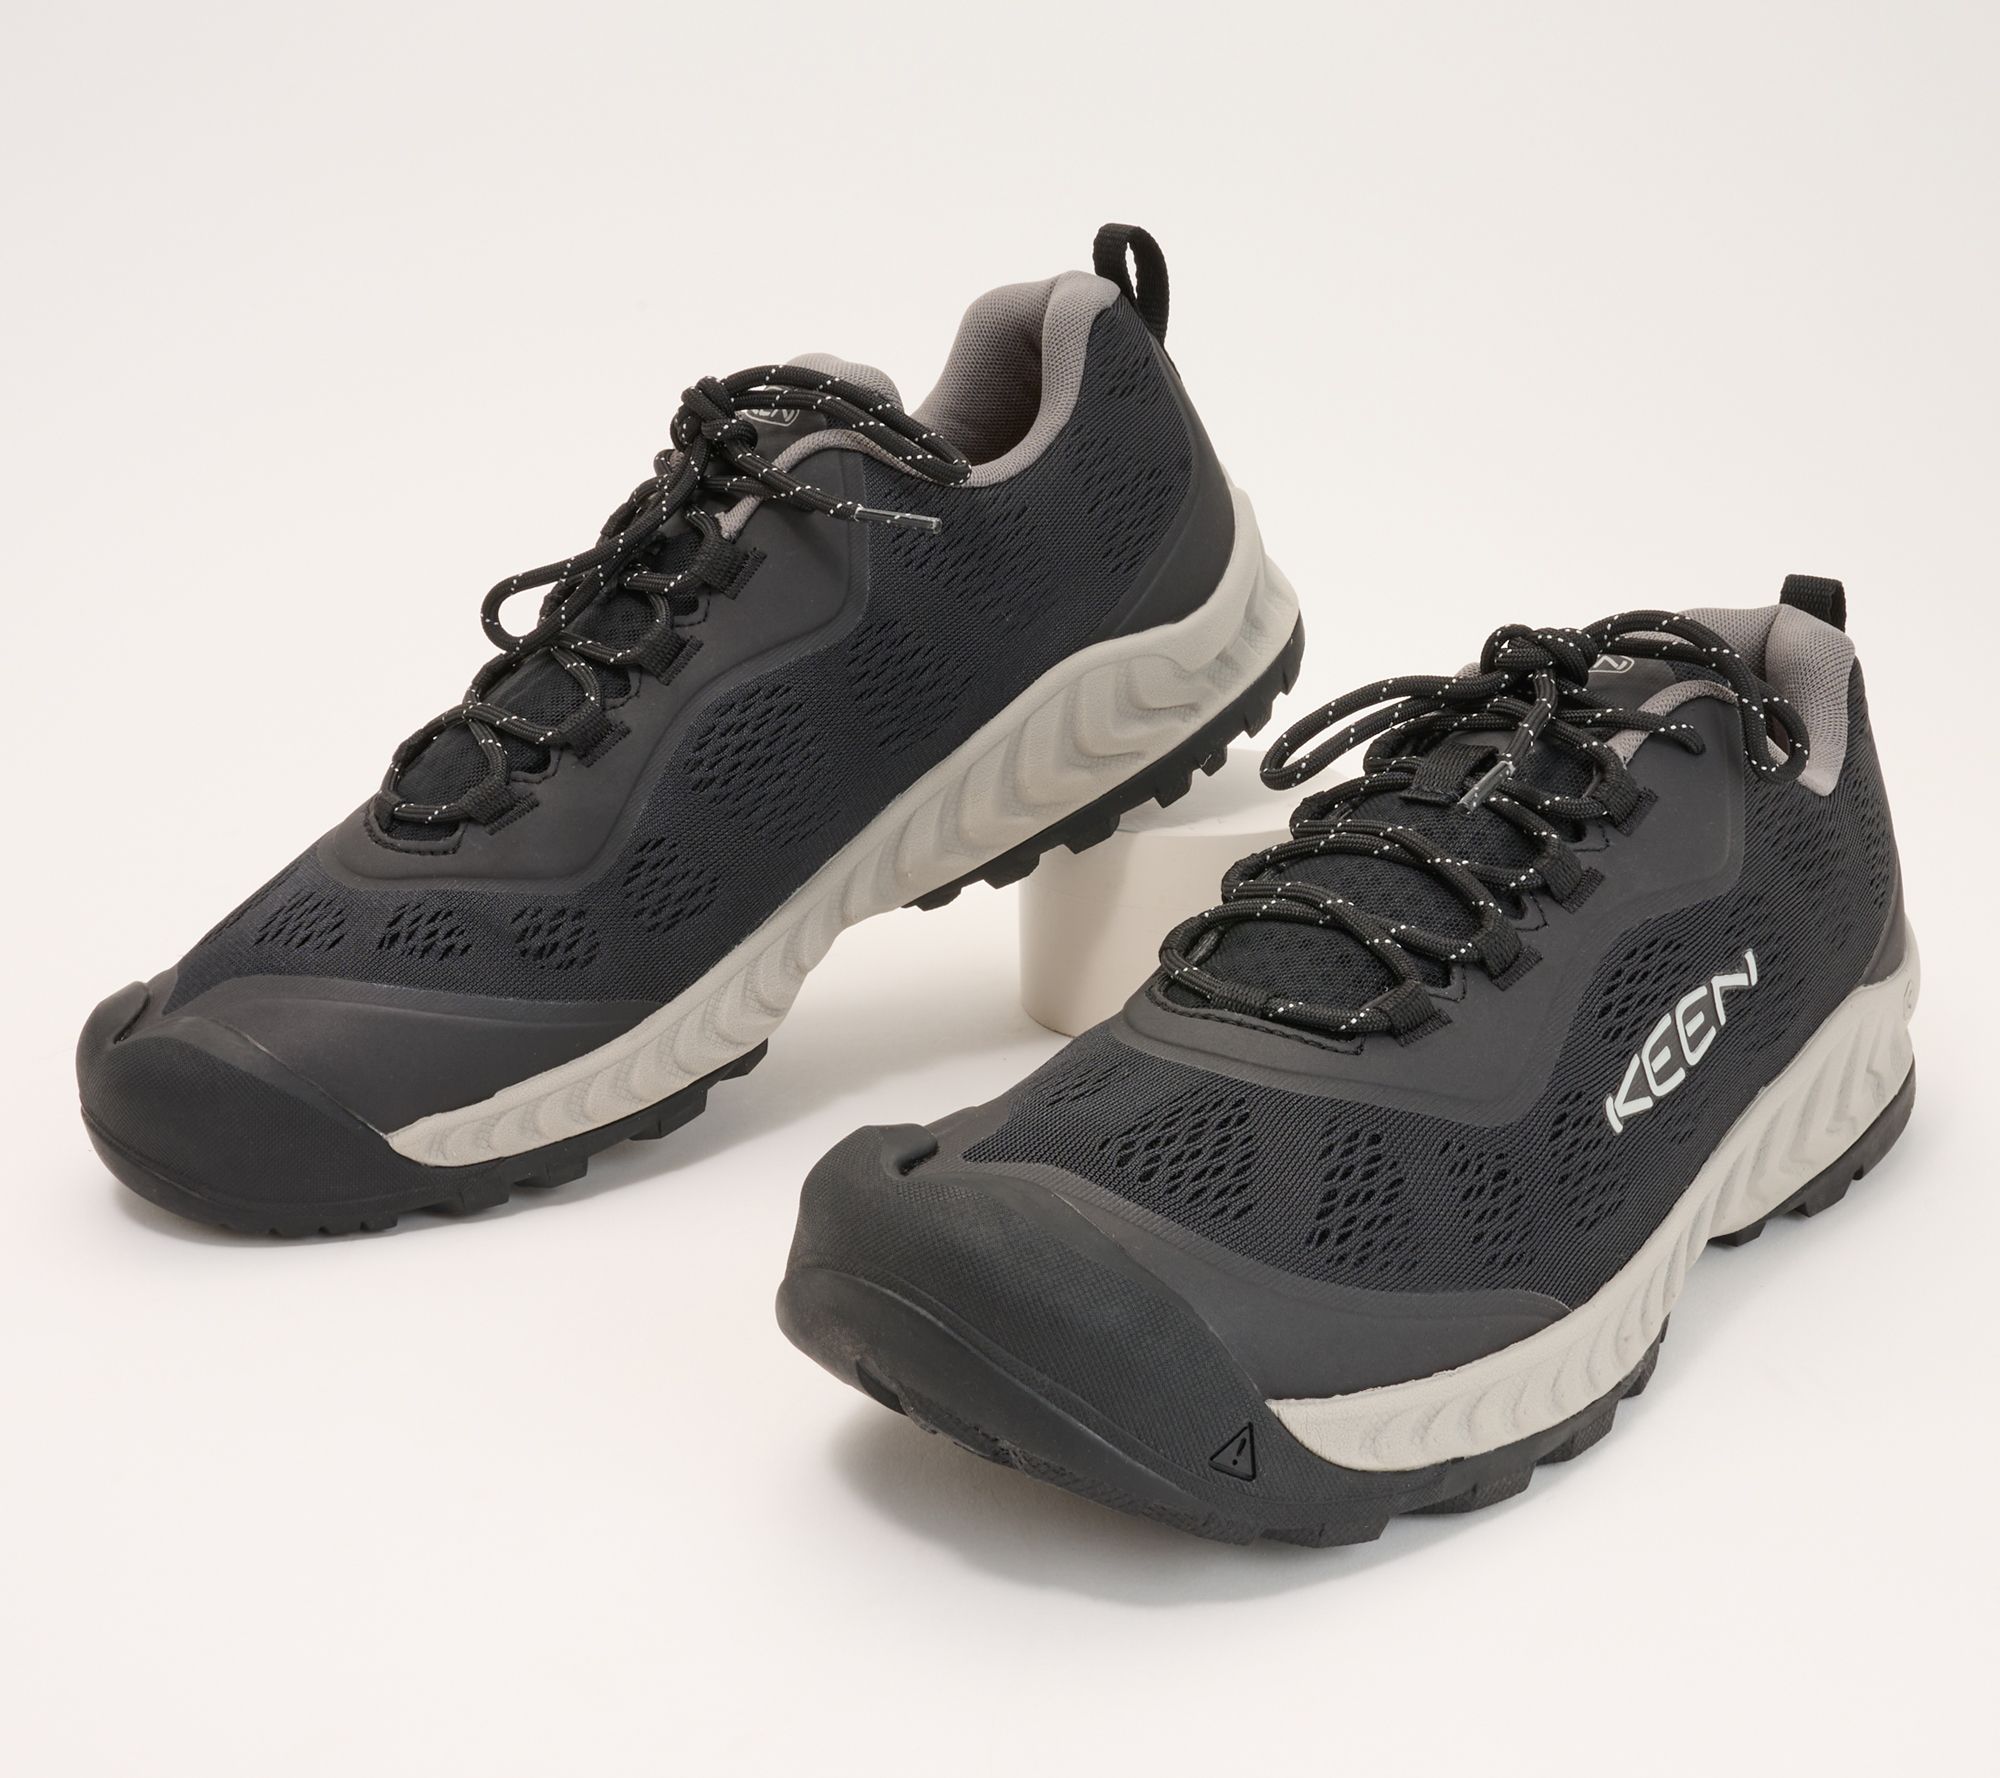 KEEN Men's Lace-Up Hiking Trail Sneakers - NXIS Speed - QVC.com